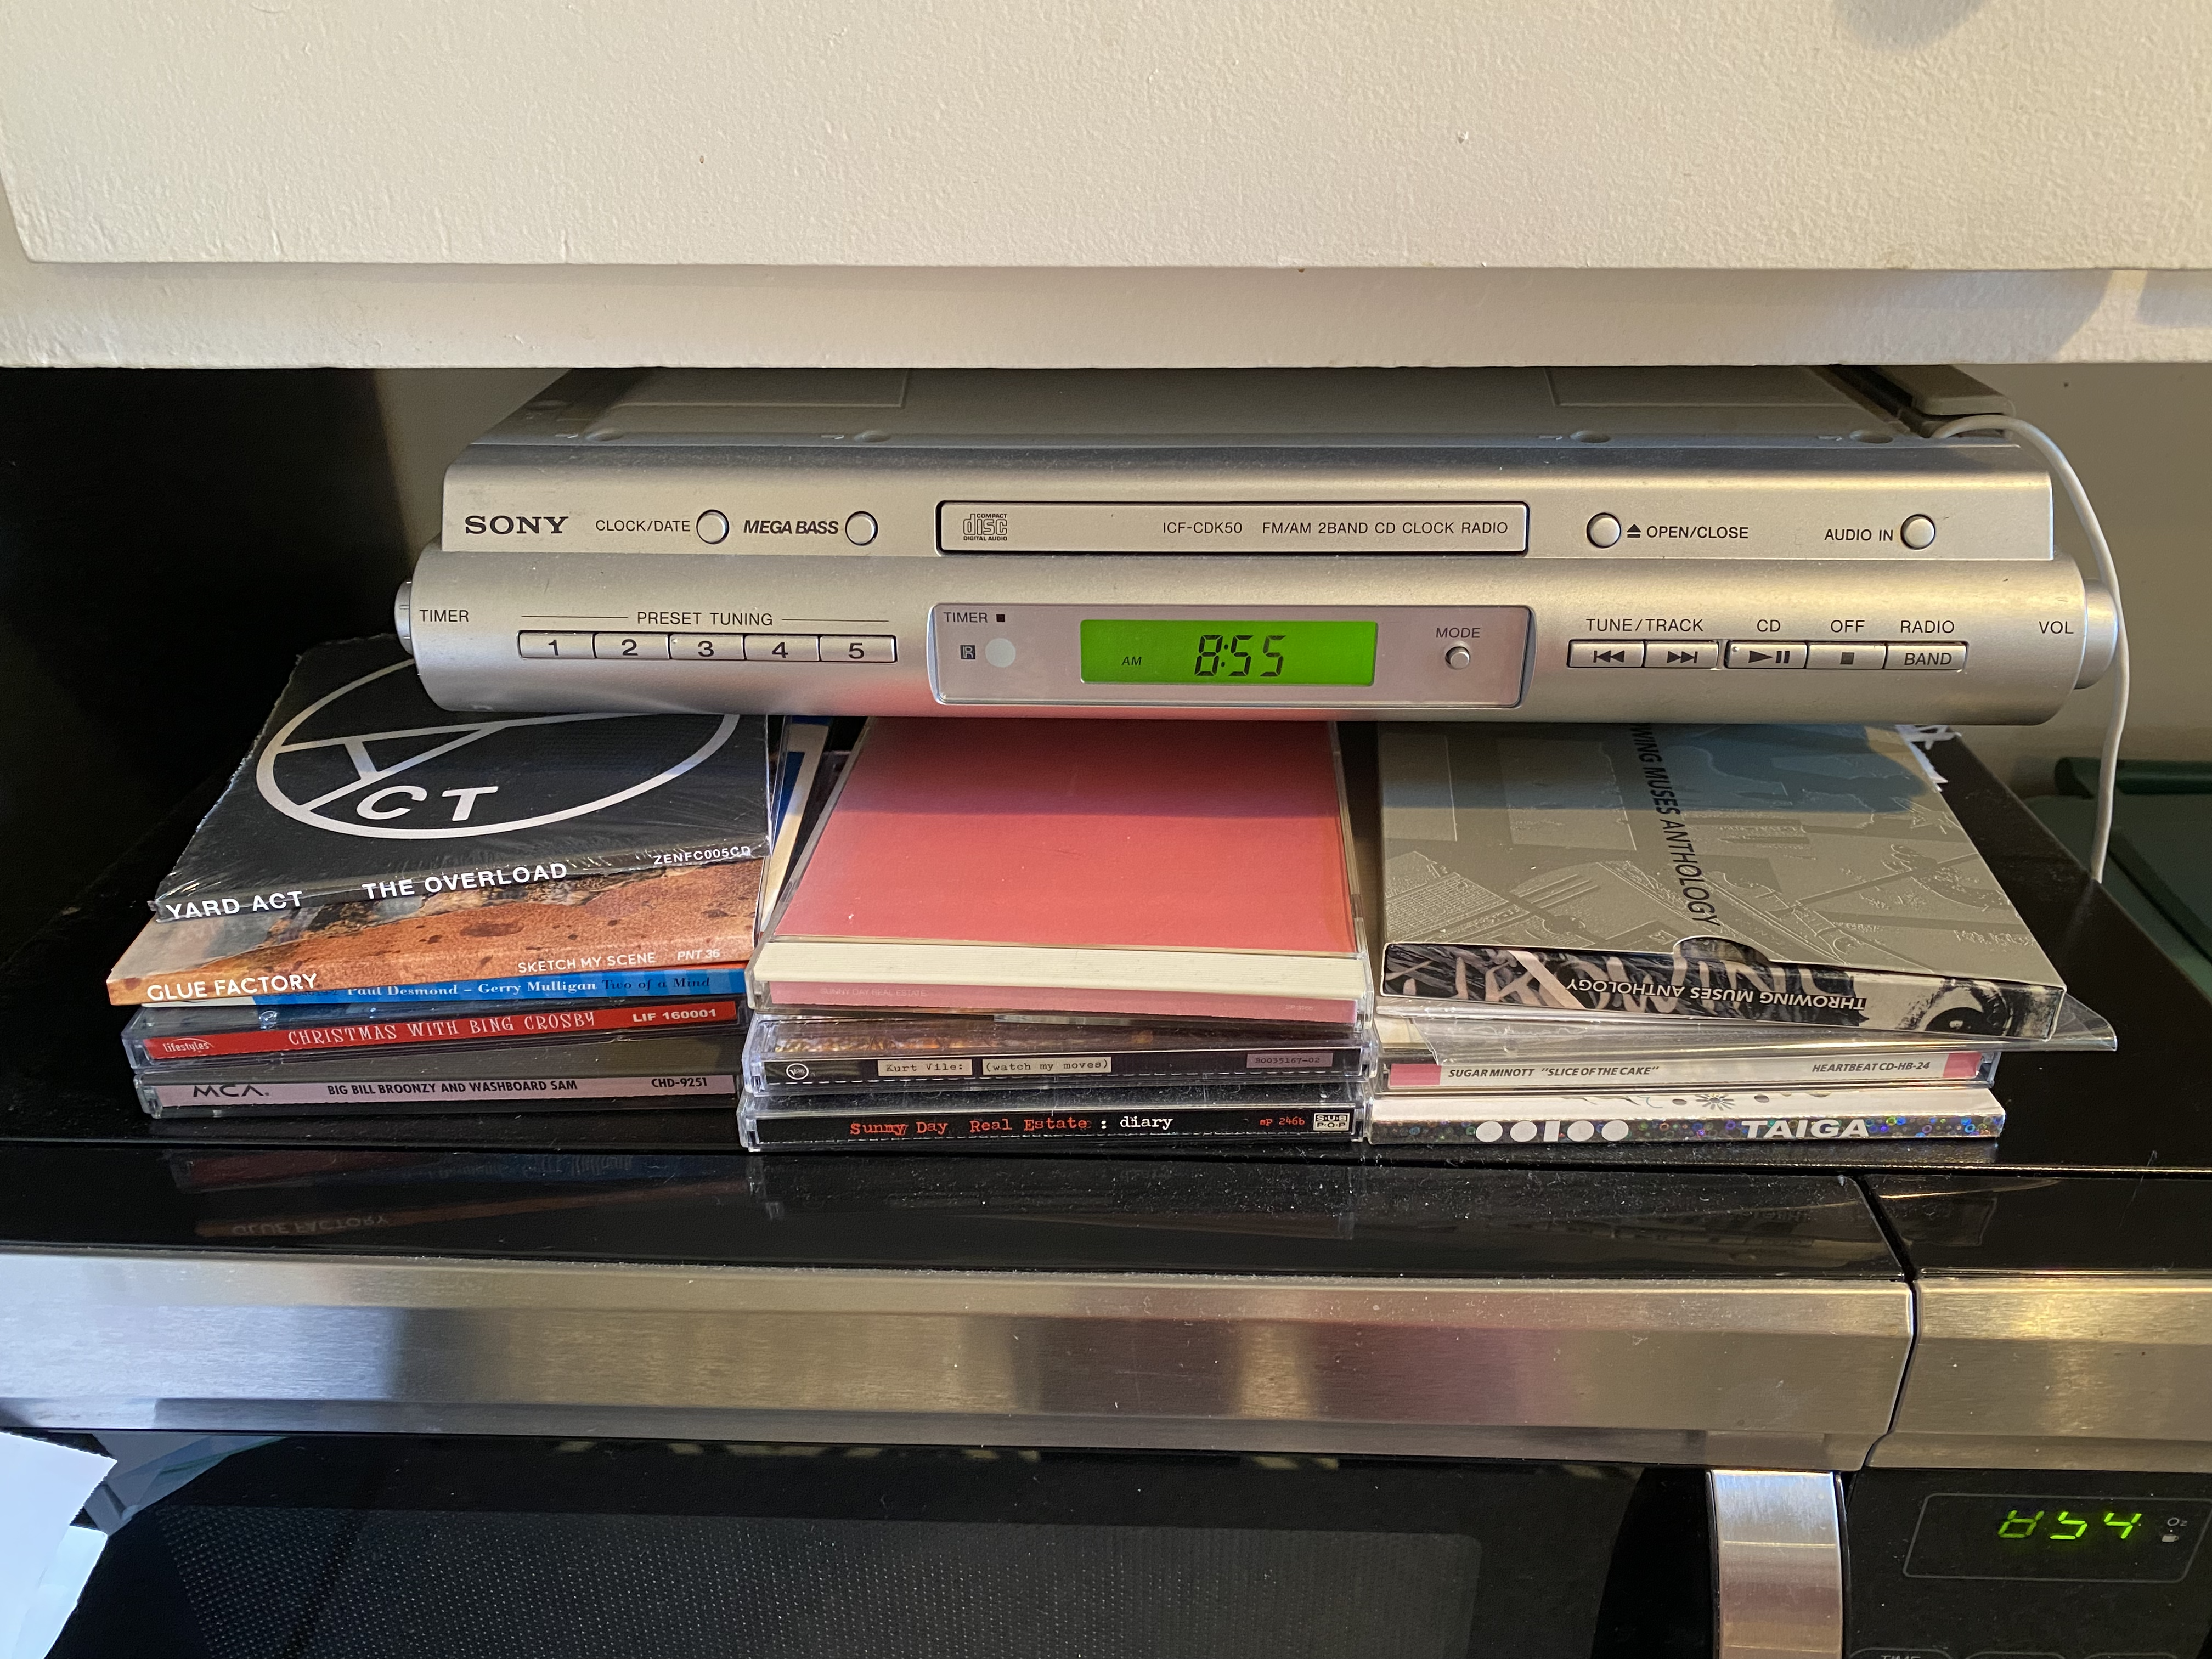 Small stacks of cds atop a microwave